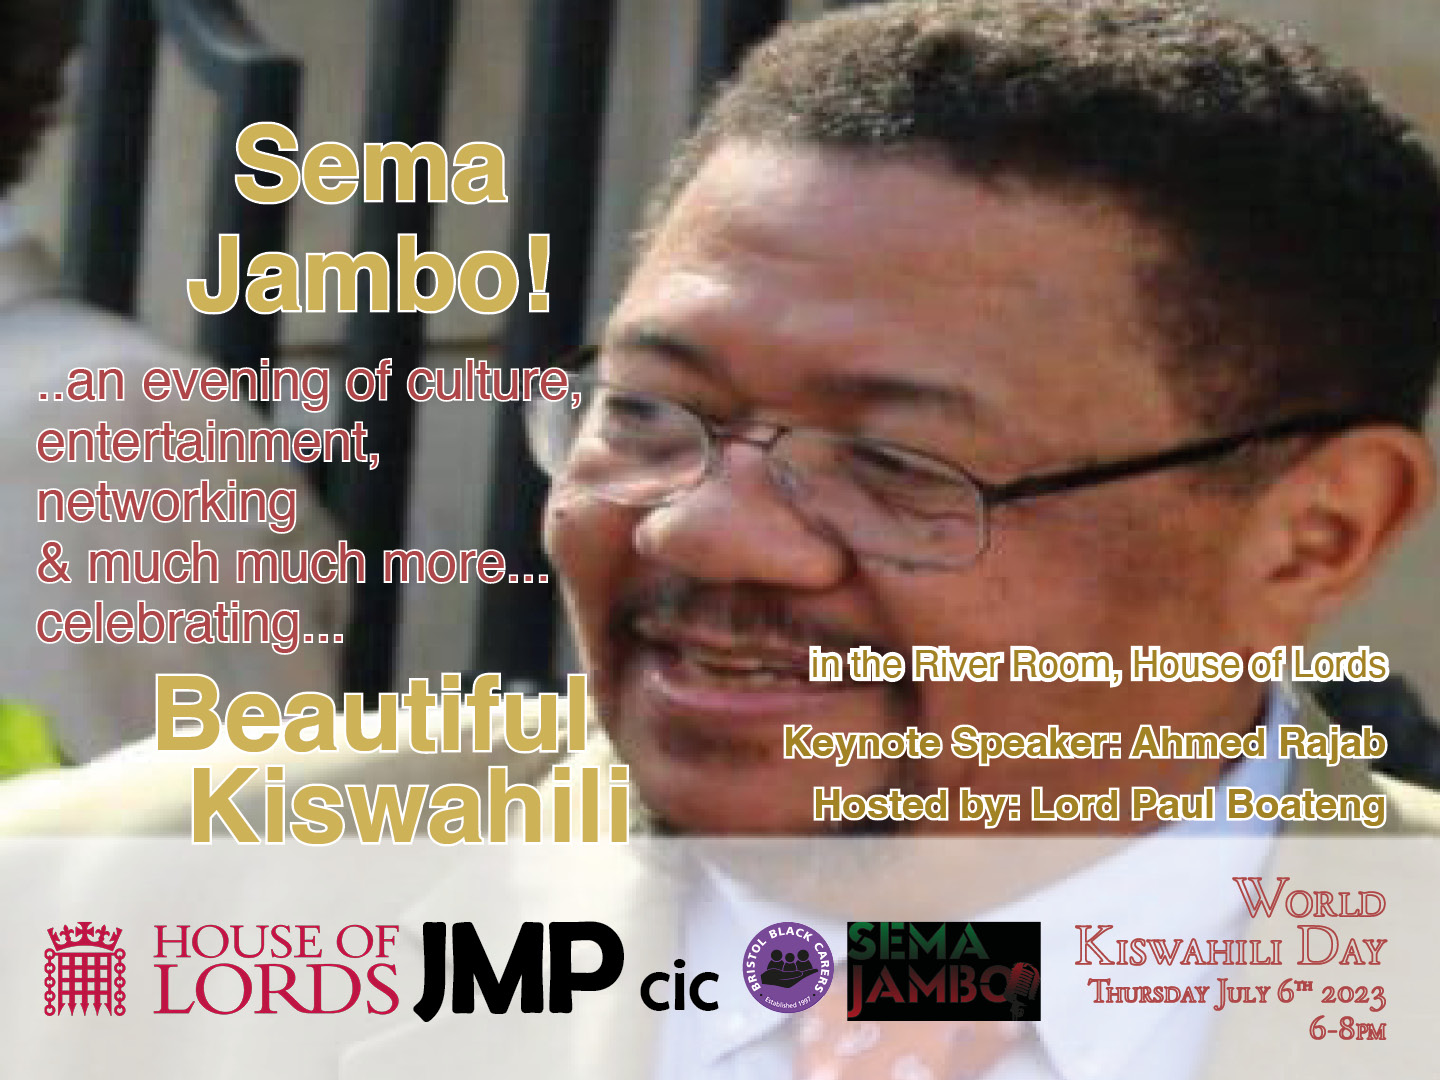 Beautiful-Kiswahili-@-the-River-Room-House-of-Lords-Thursday-July-6th-_Keynote-Speaker-Ahmed-Rajab-legendary-Broadcaster